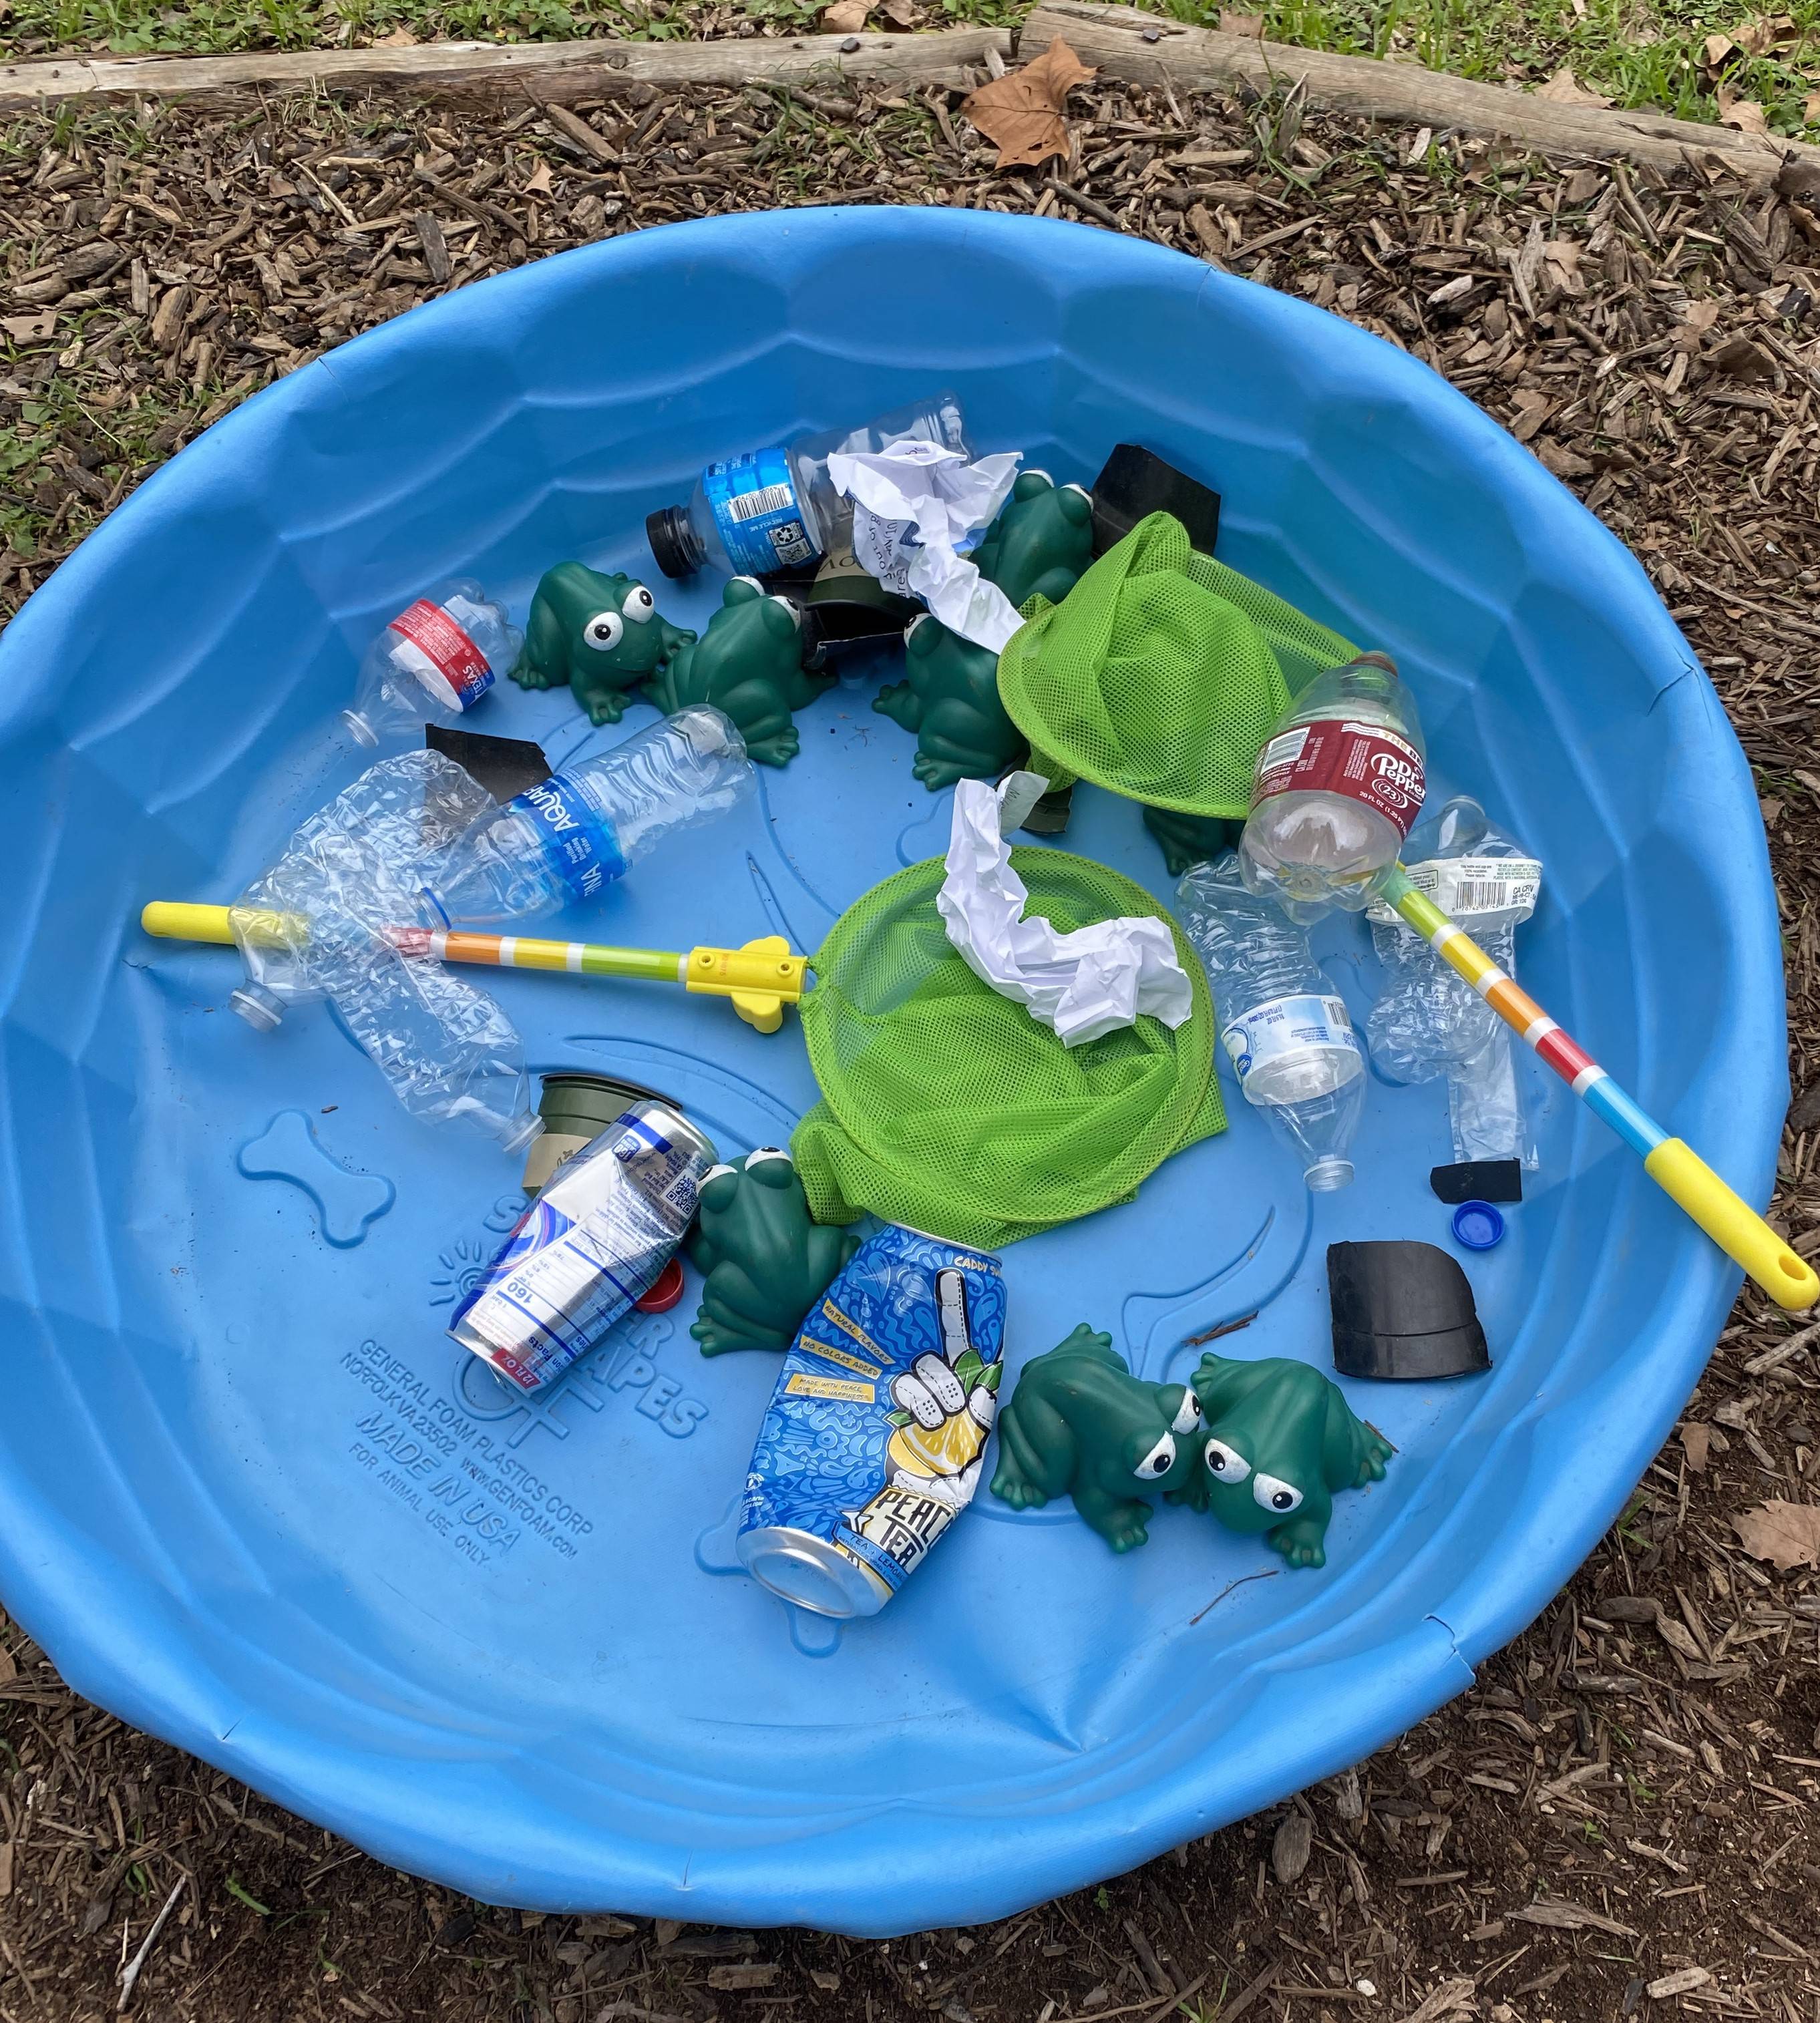 Plastic frogs are surrounded by litter in a blue kiddie pool from which students must fish out pollutants to symbolize keeping our natural environment clean.